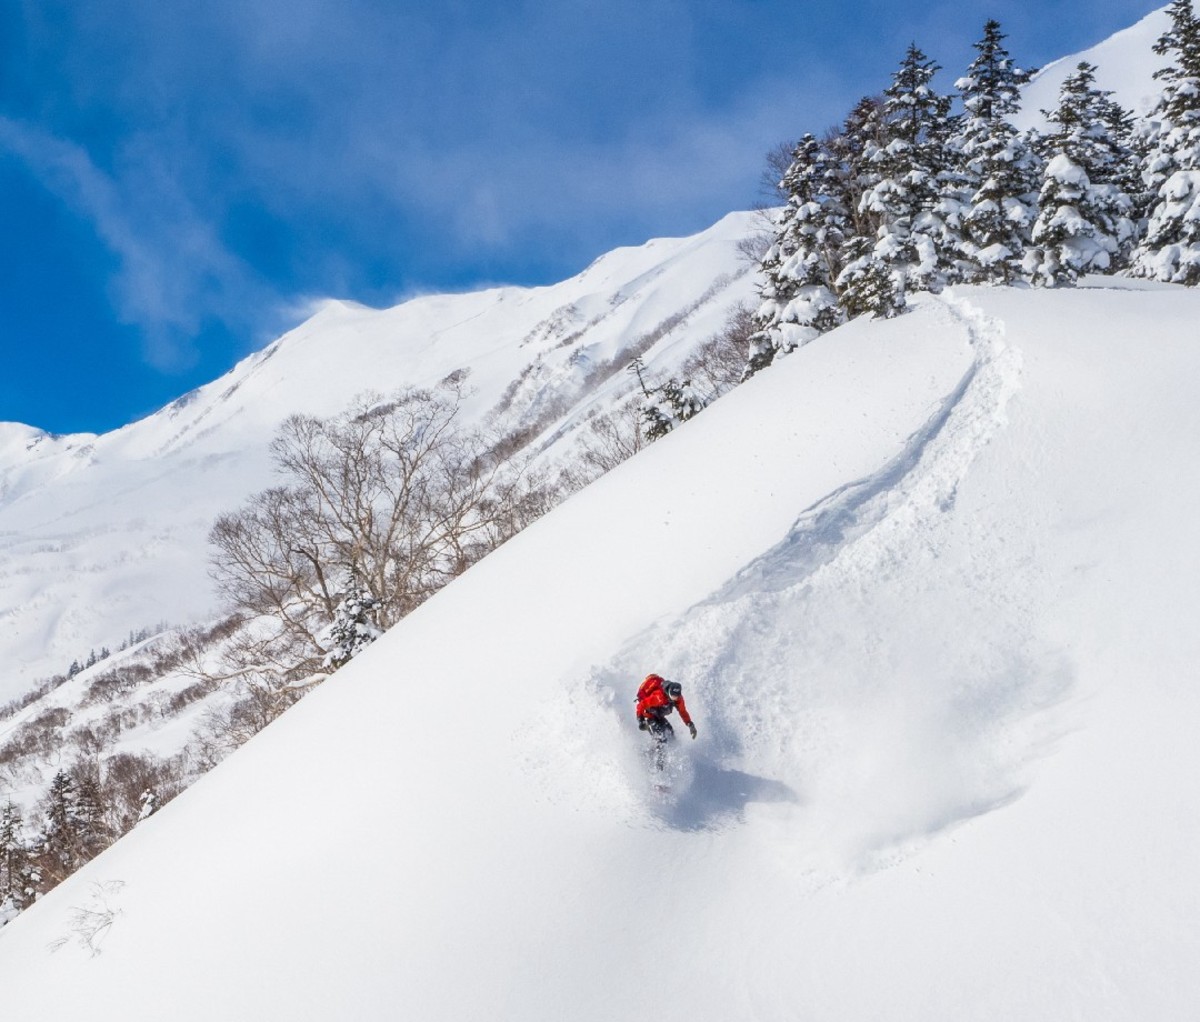 Snowboarder heading down a powdery slope in the Japanese Alps.